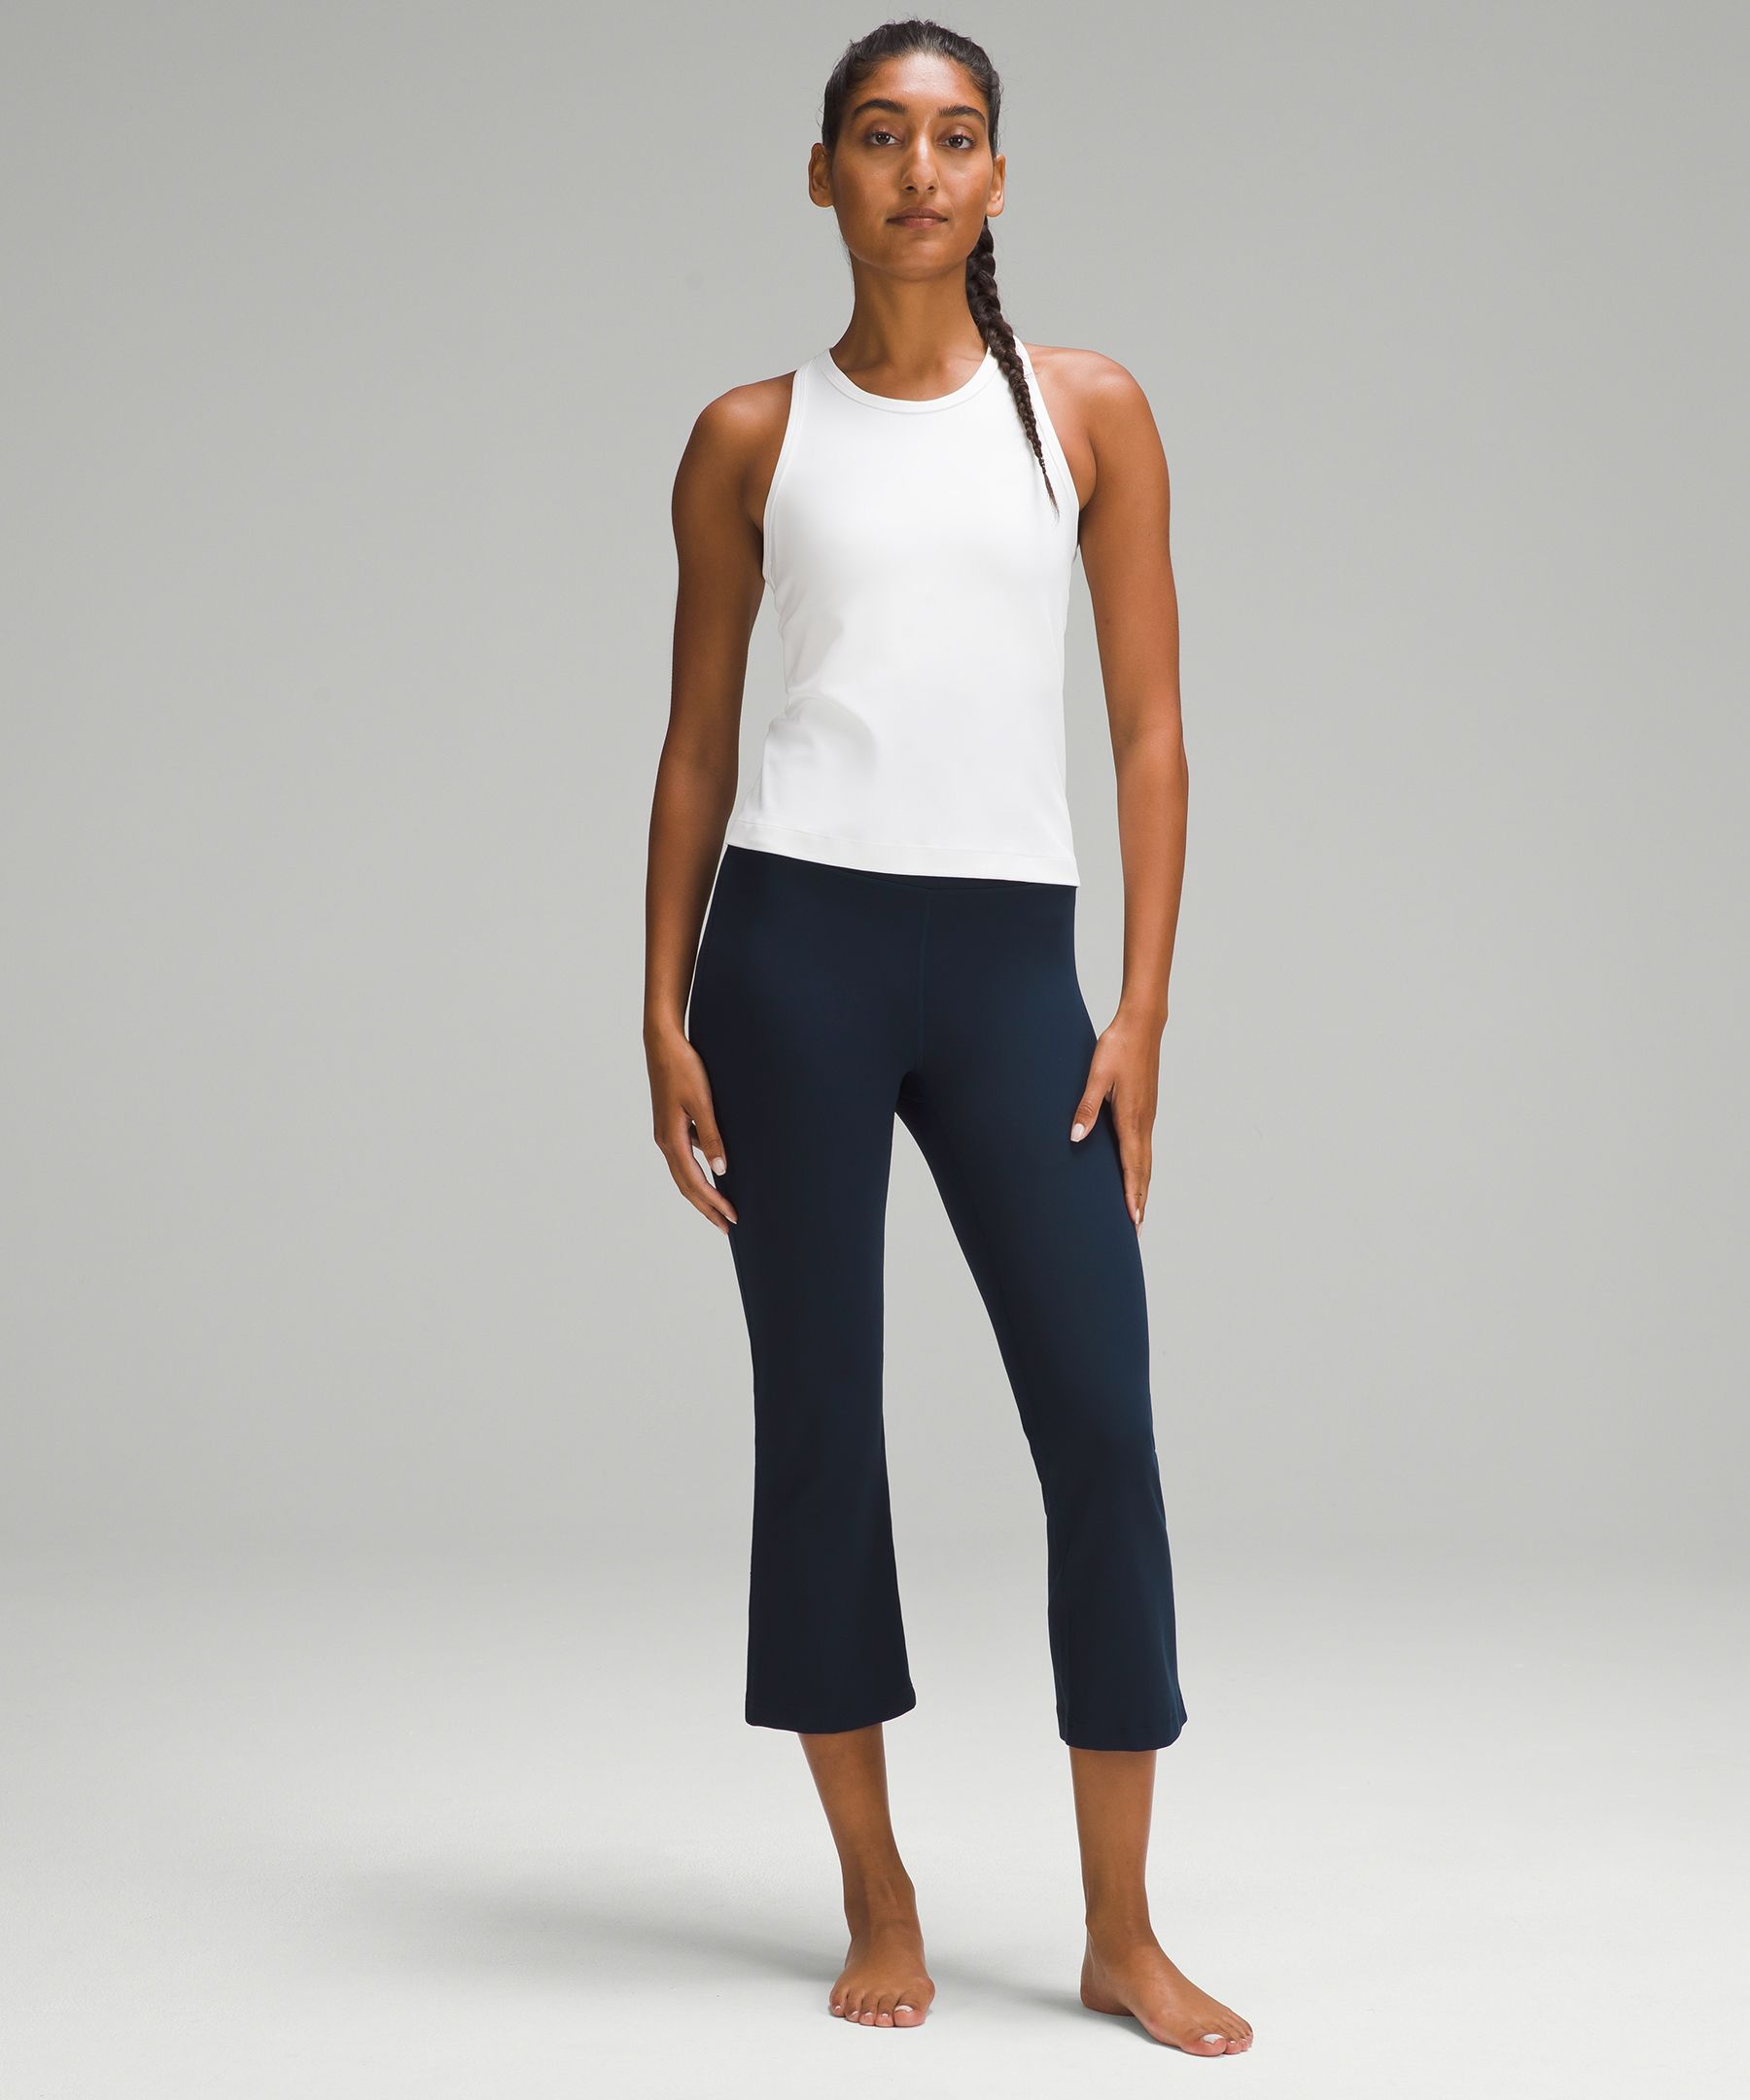 Lululemon Groove cropped flare color block athletic pants 6 Black - $41  (67% Off Retail) - From Candi